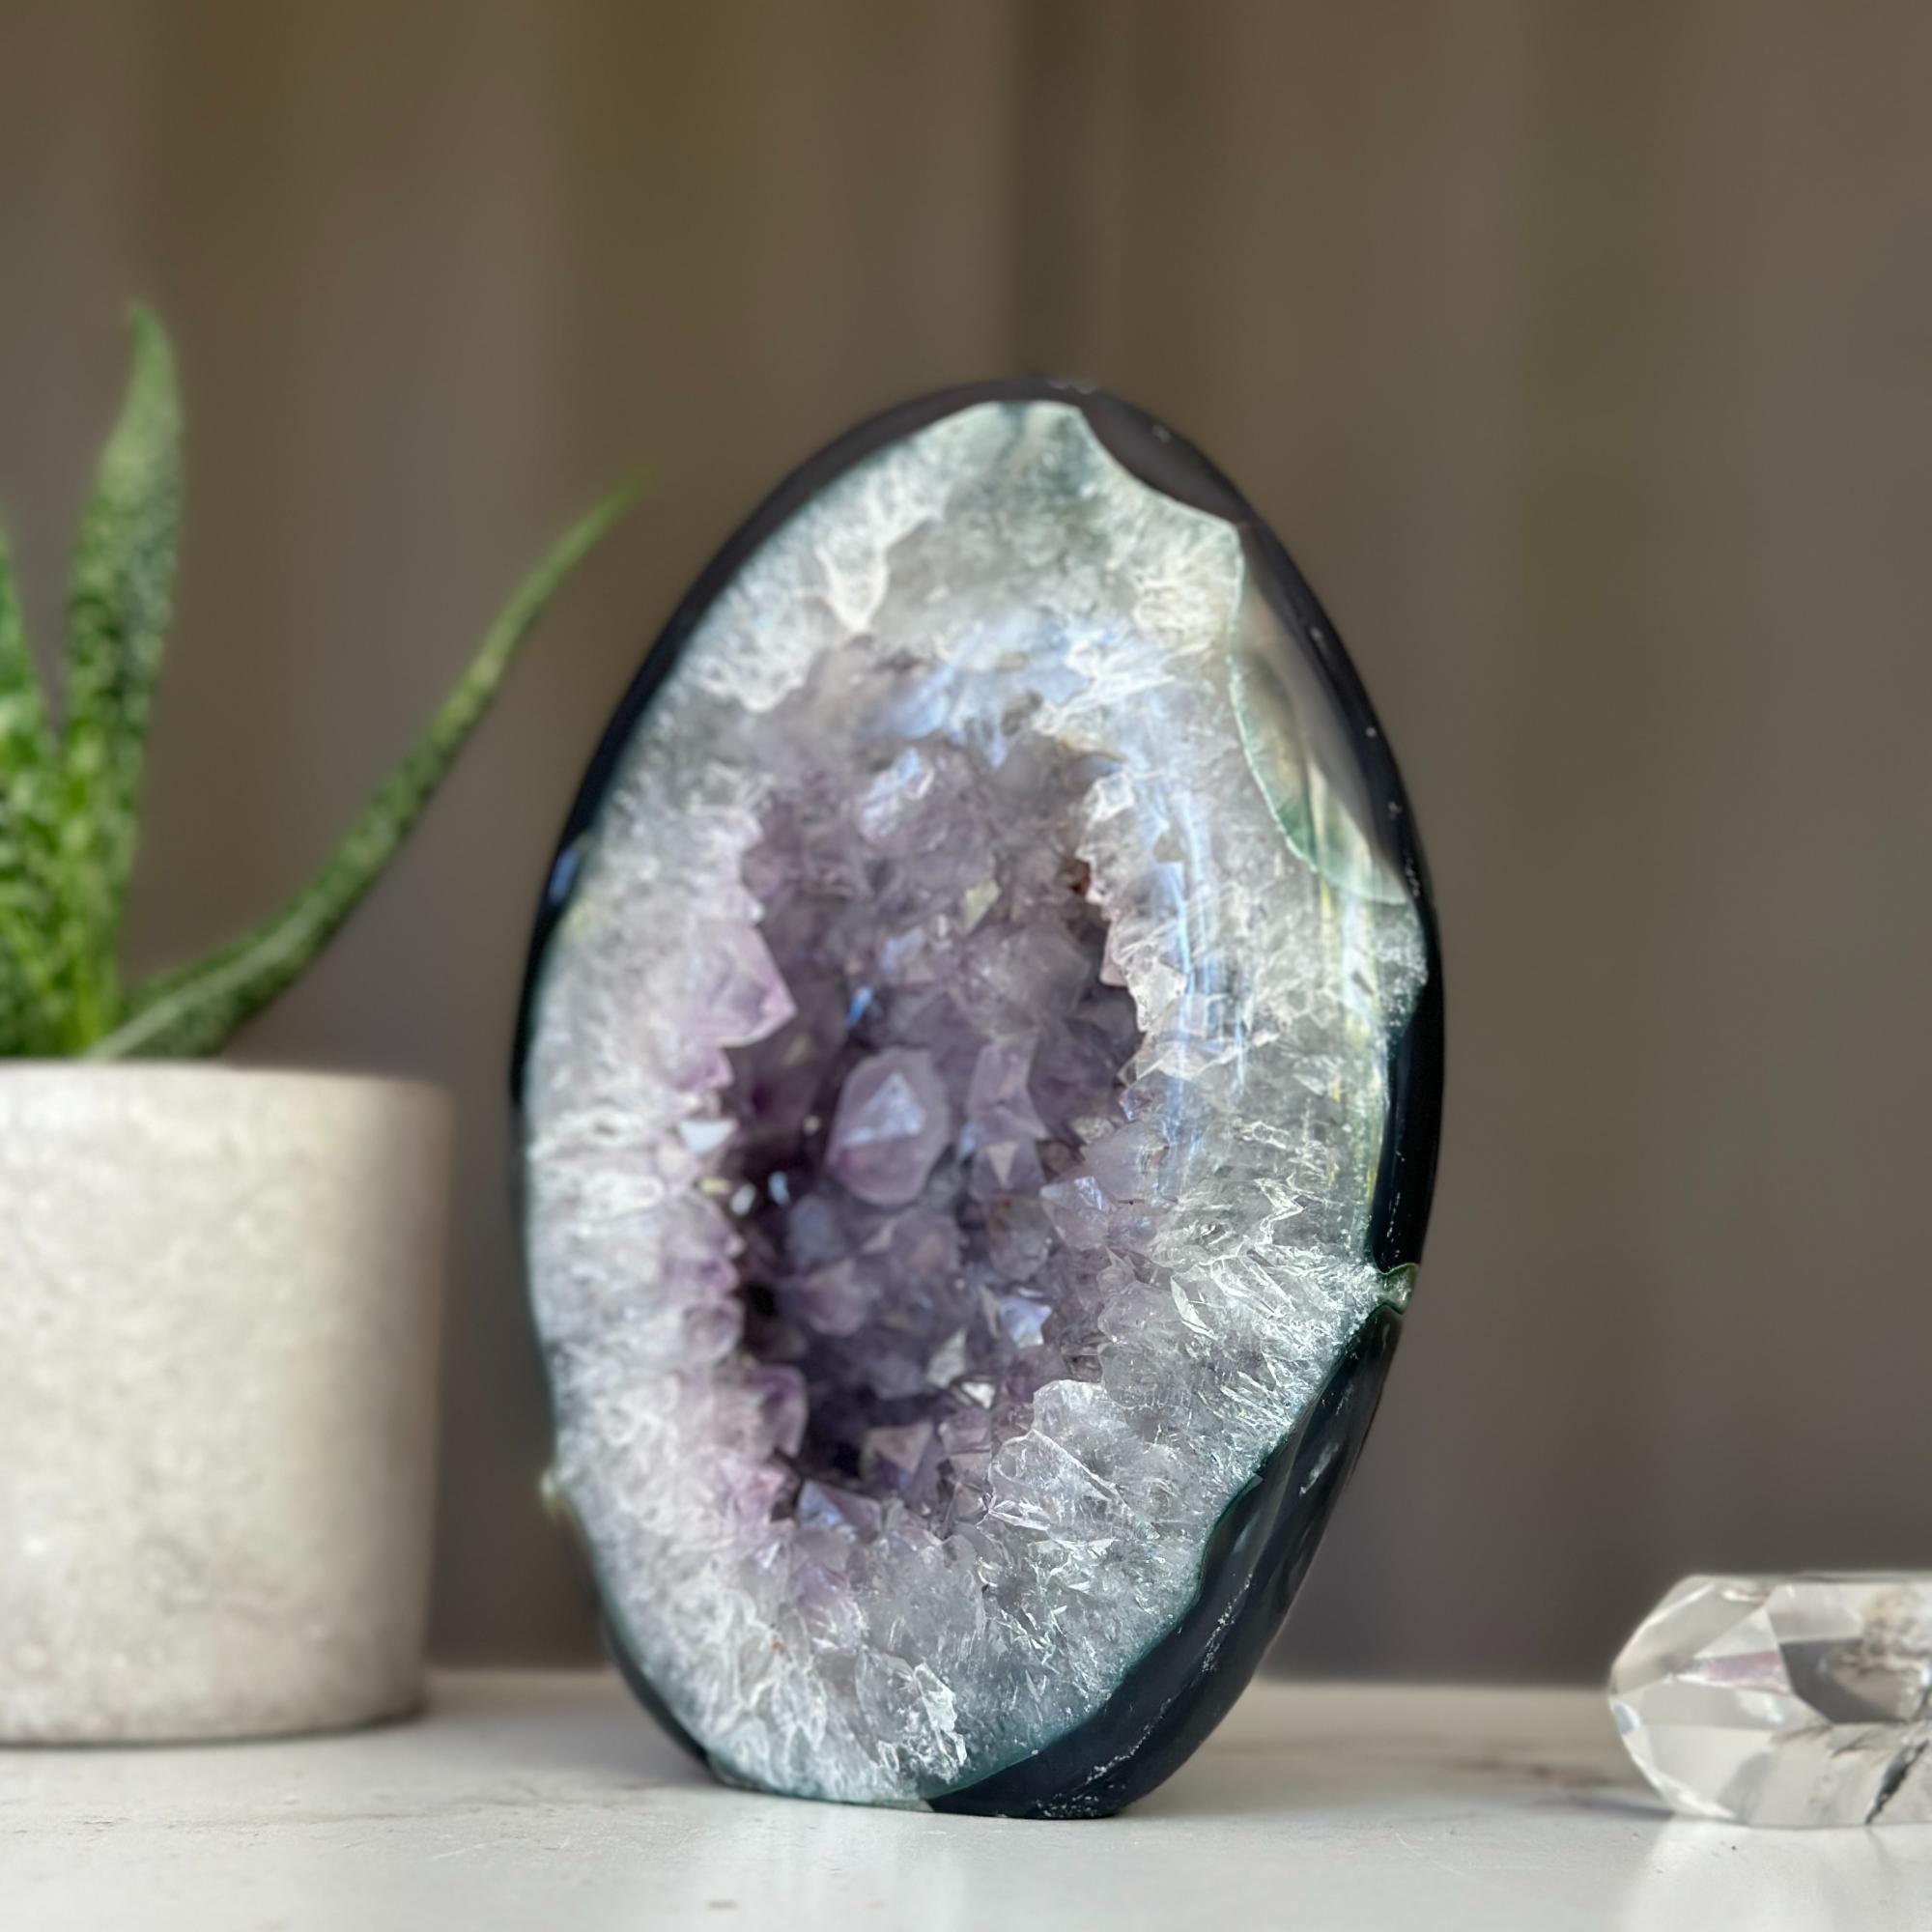 Superb Amethyst Crystal Geode with Agate formations, 7 in tall Extra Large Amethyst Cave, Oval Shaped Stone Polished at edges